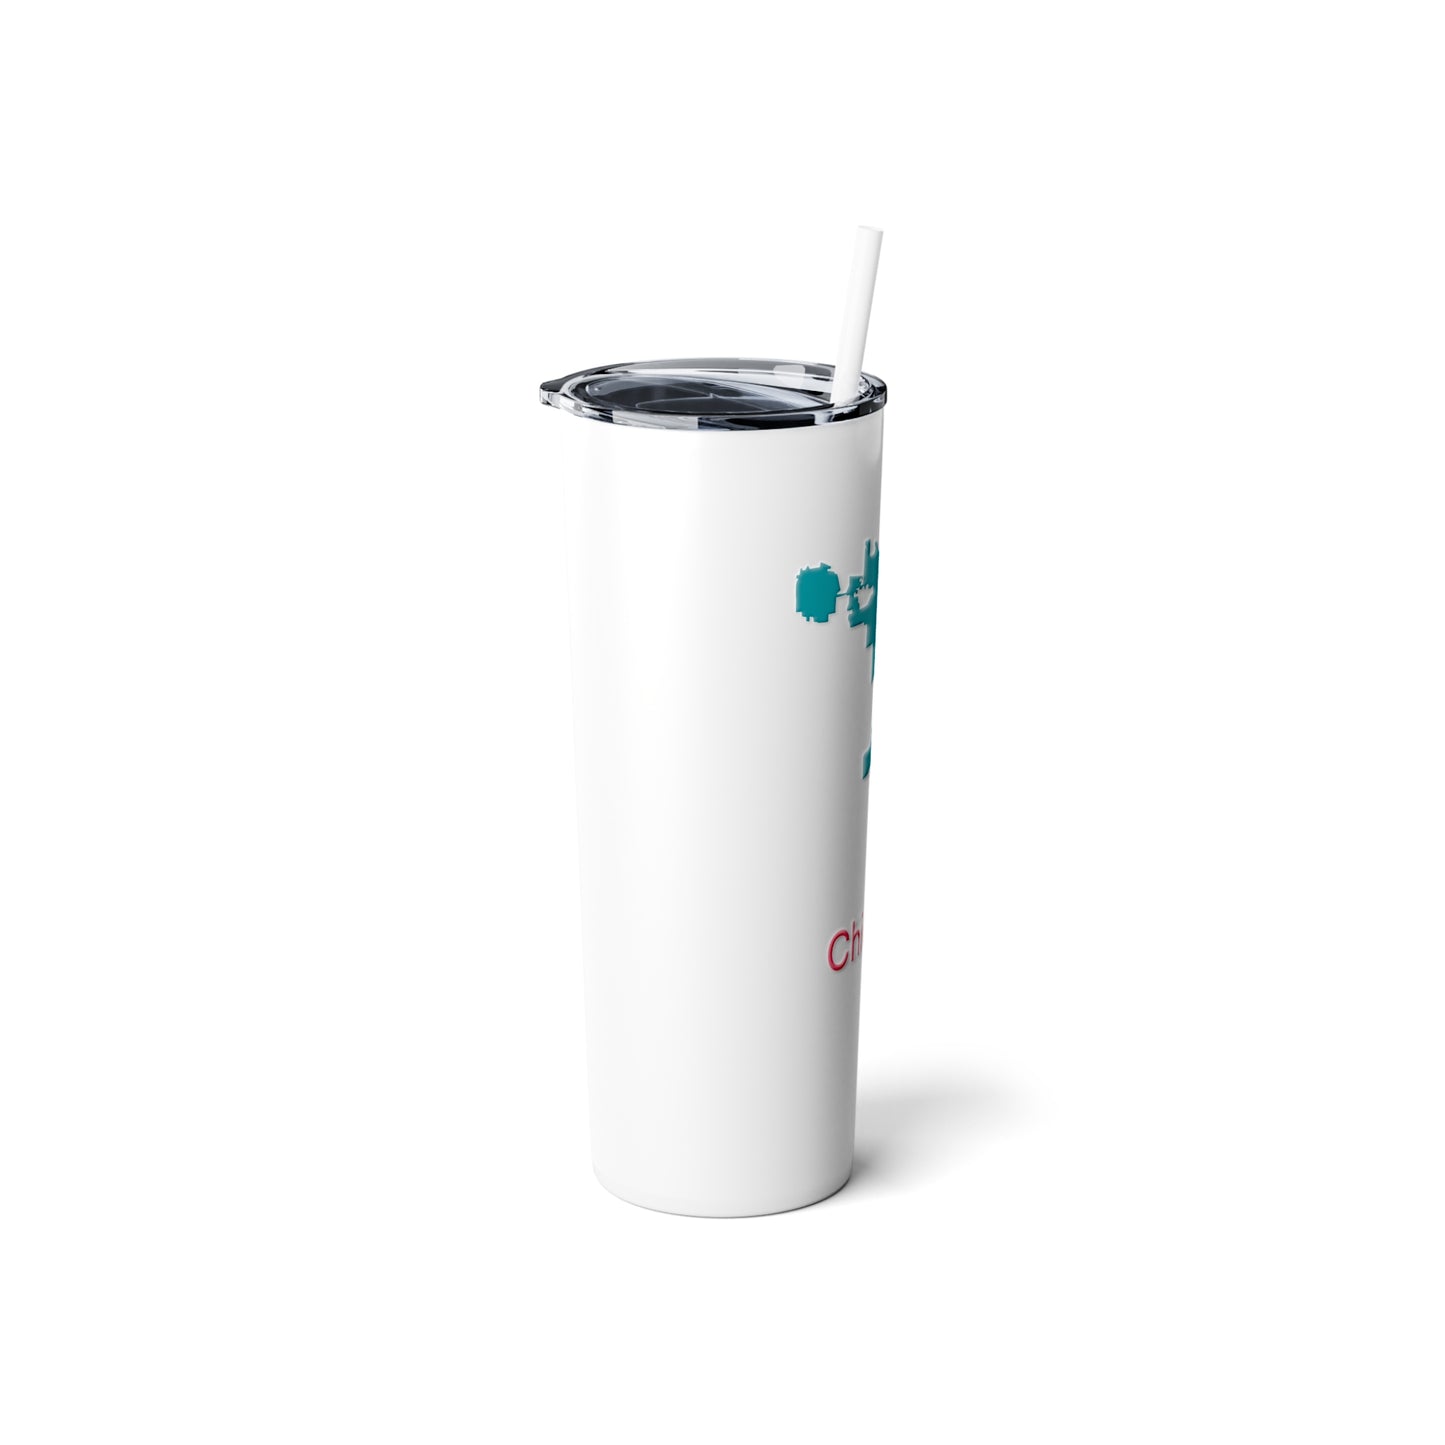 Chicago in Teal and Hot Pink Skinny Steel Tumbler with Straw, 20oz